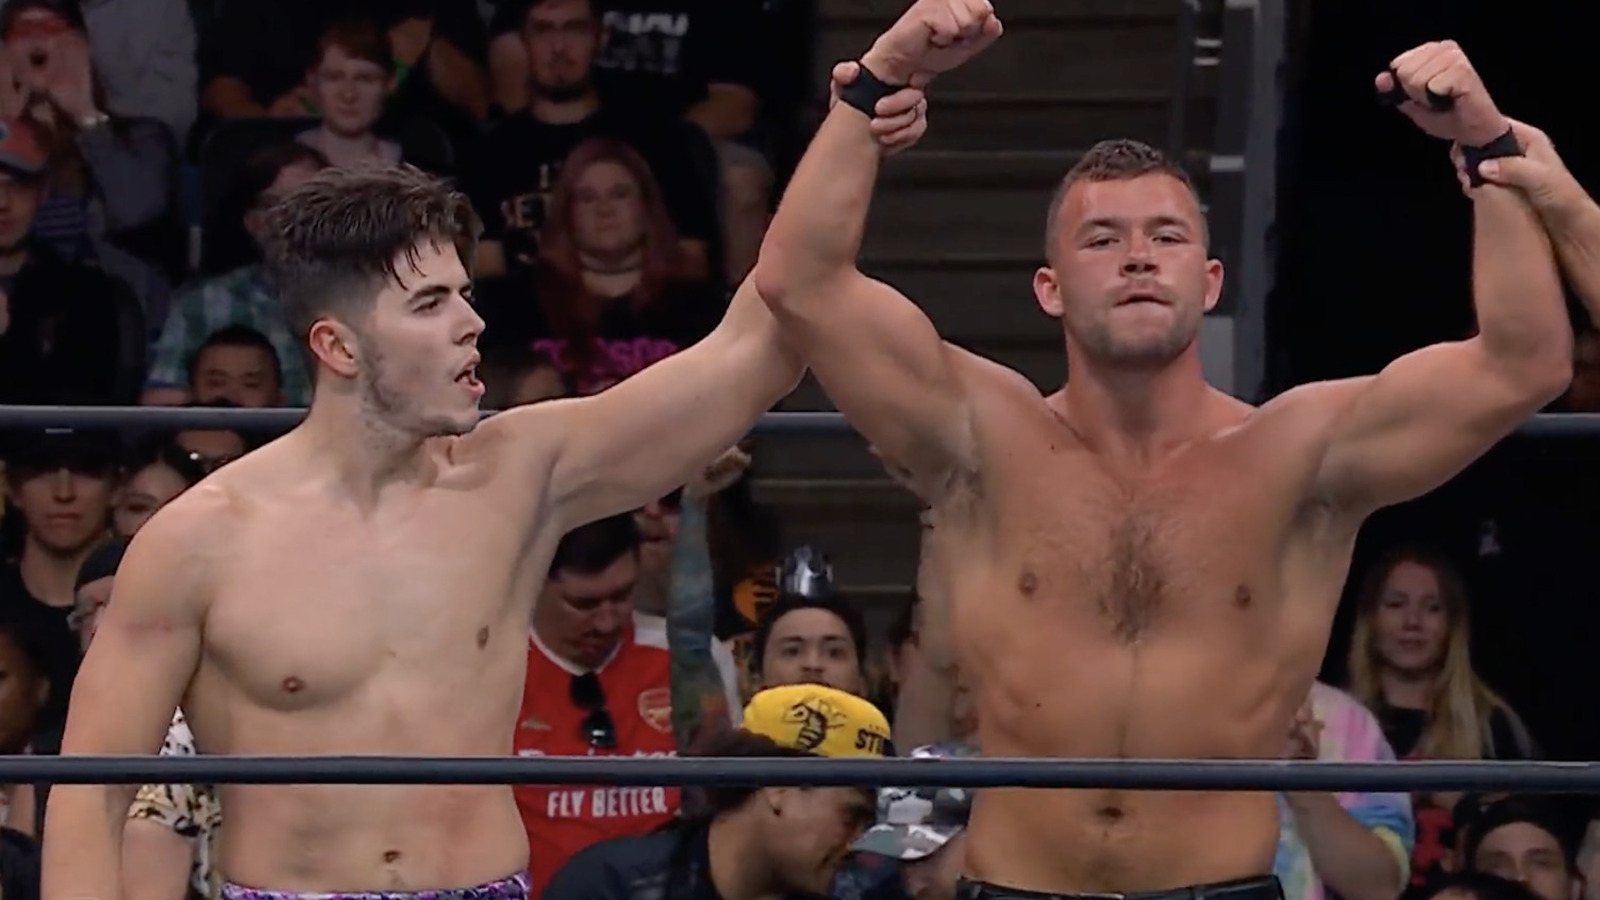 Danhausen Comments On AEW Debut Doing Big Numbers On , DDP Impressed  By Sammy Guevara's Ladder Cutter